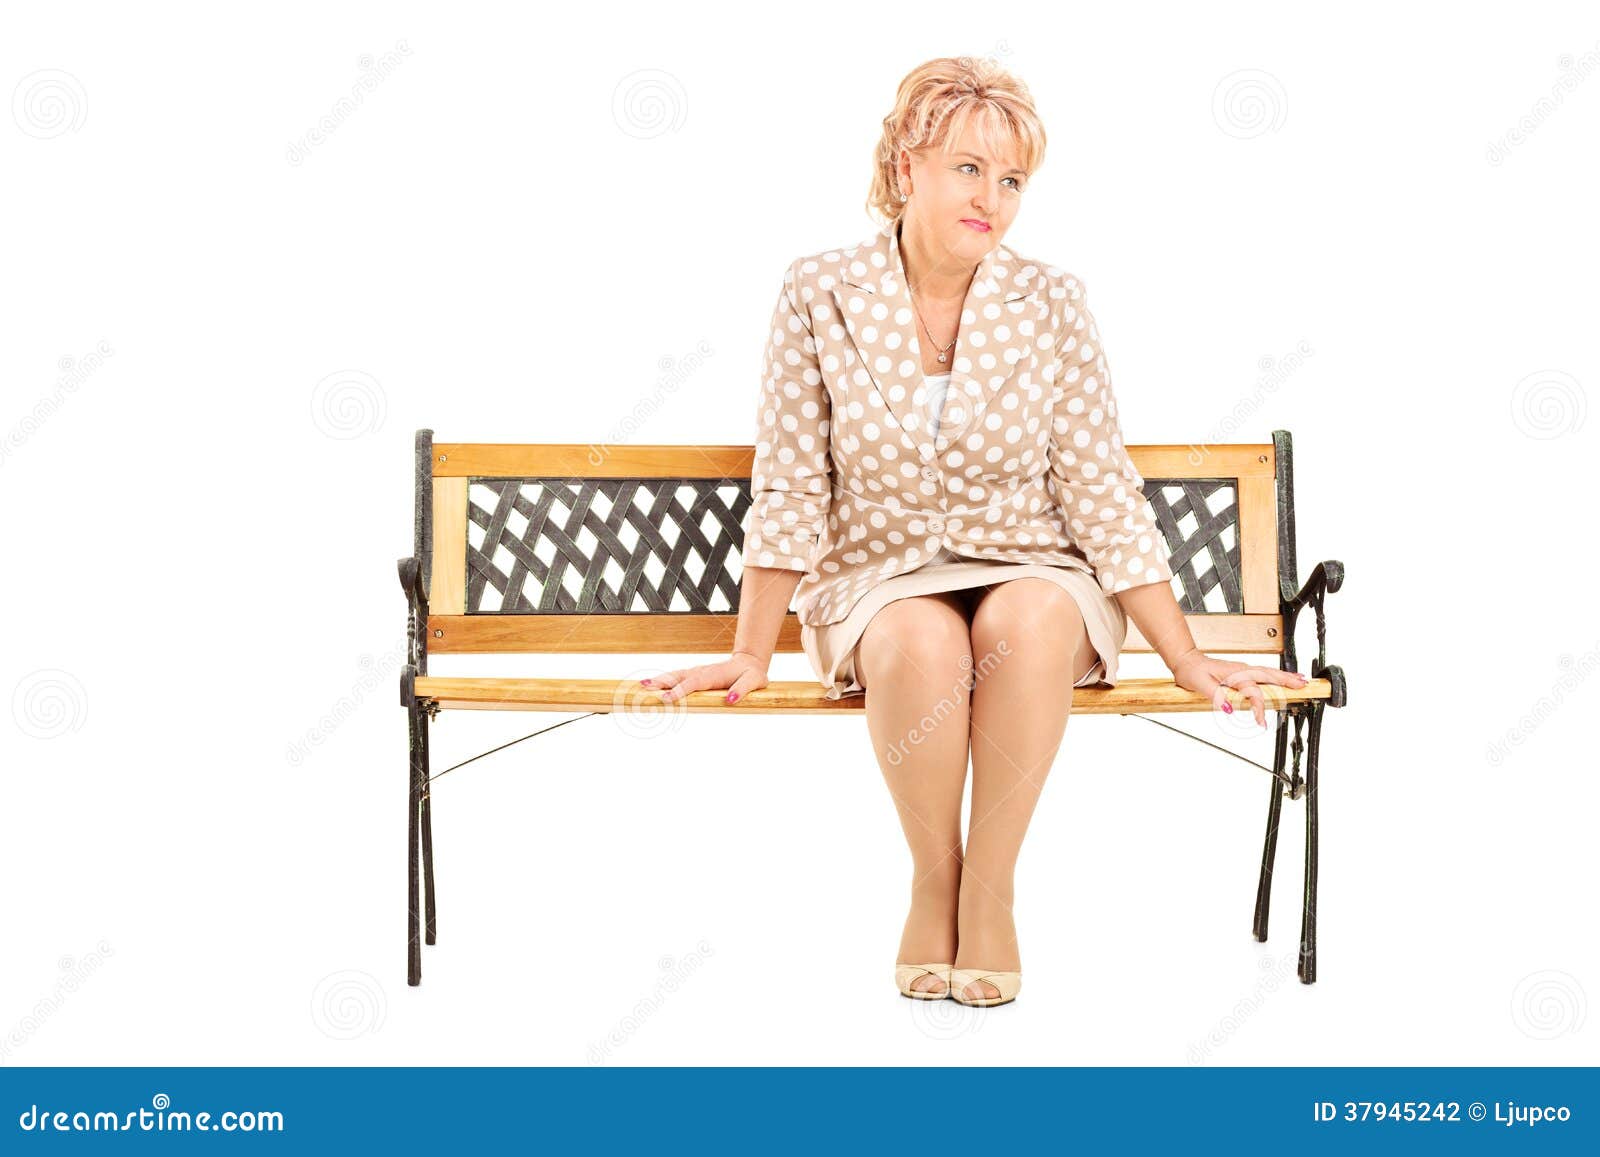 Mature Lady Sitting On A Bench Isolated On White Background Stock ...